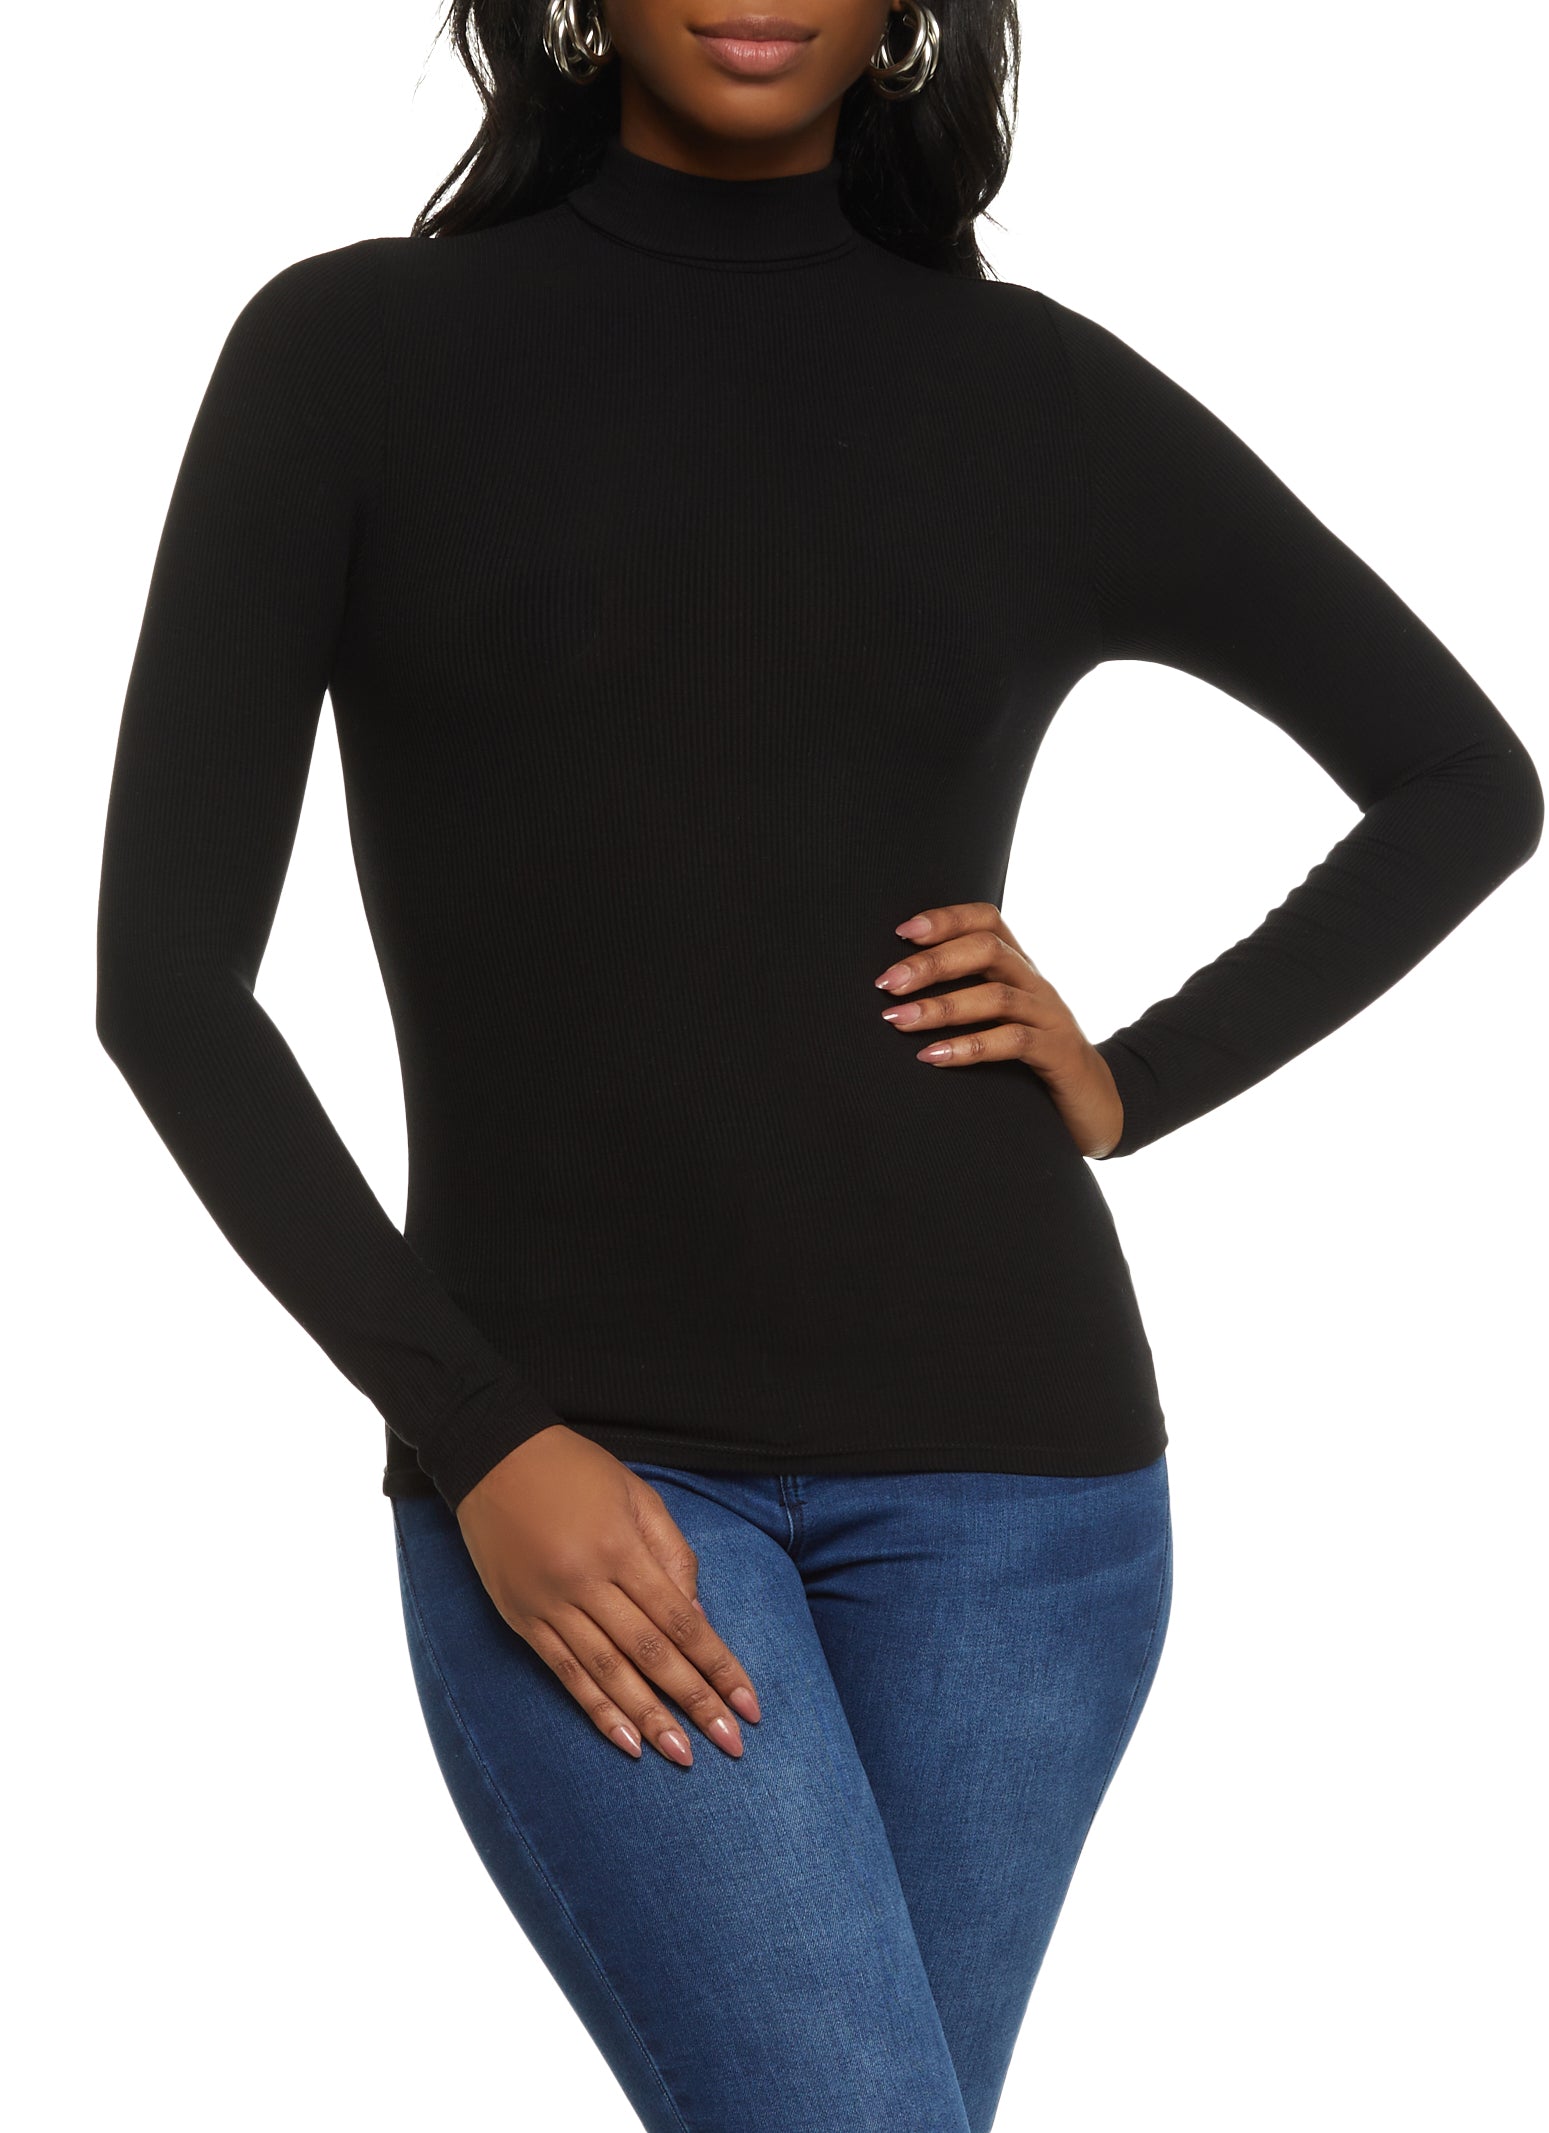 Womens Long Sleeve Tops, Everyday Low Prices